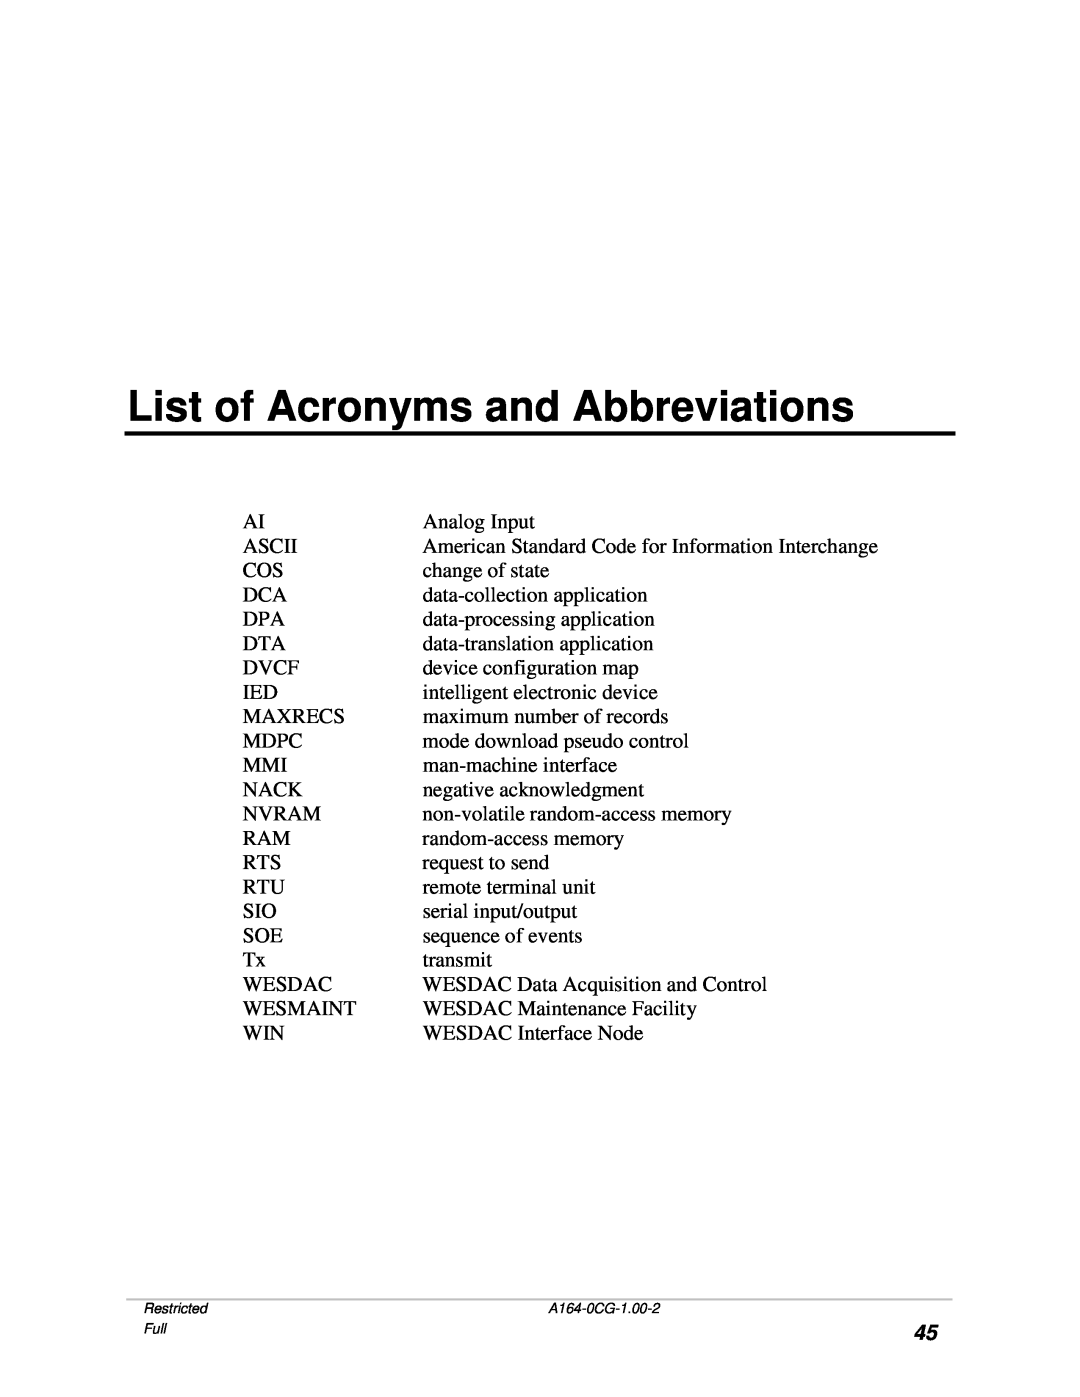 GE BECCO2200 manual List of Acronyms and Abbreviations 